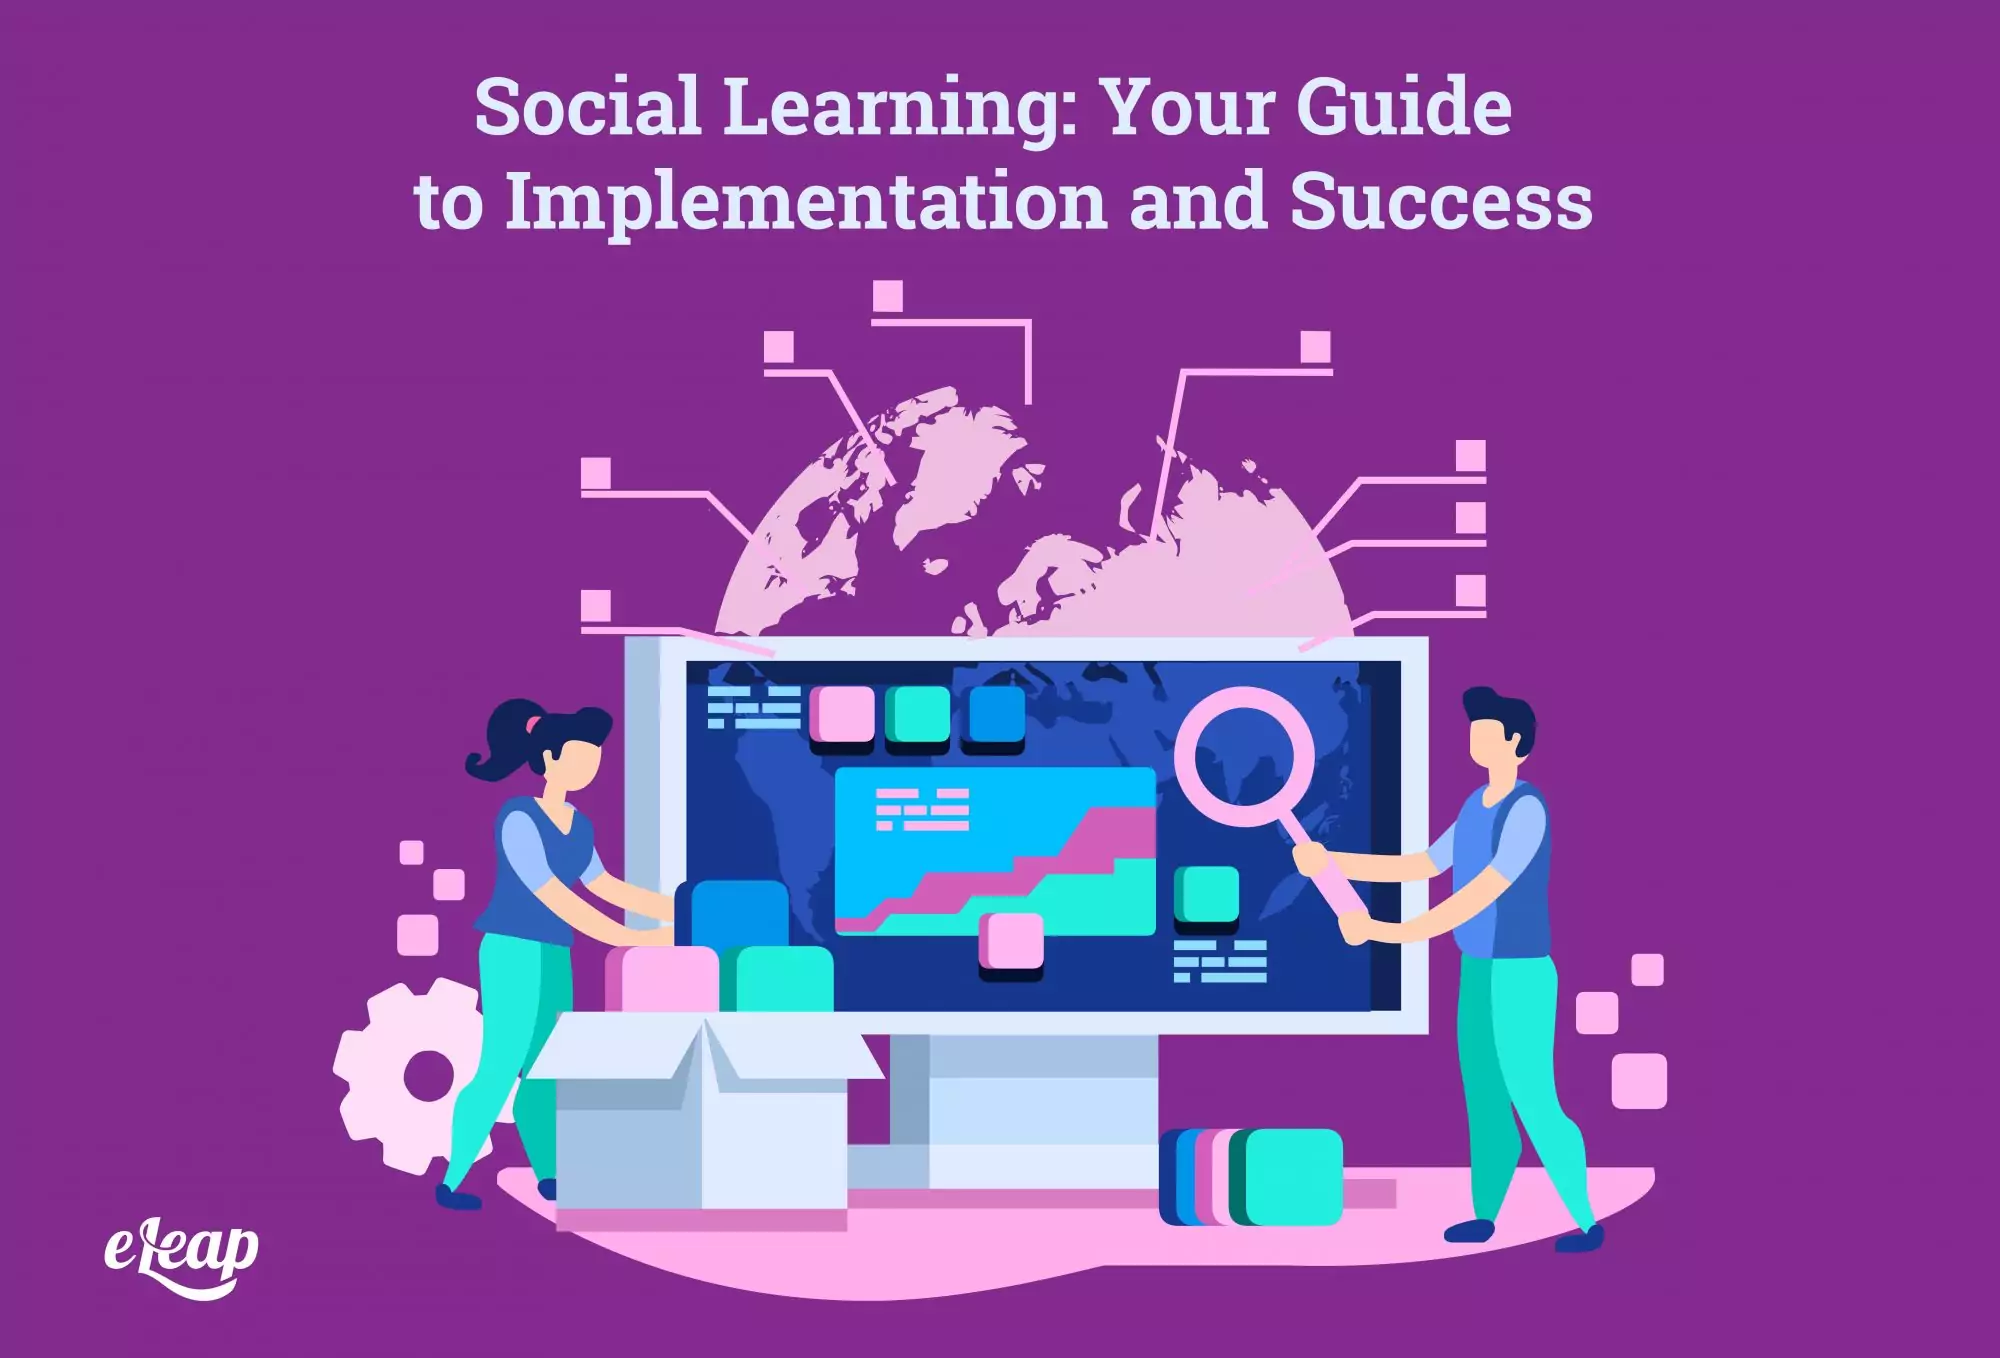 Social Learning: Your Guide to Implementation and Success